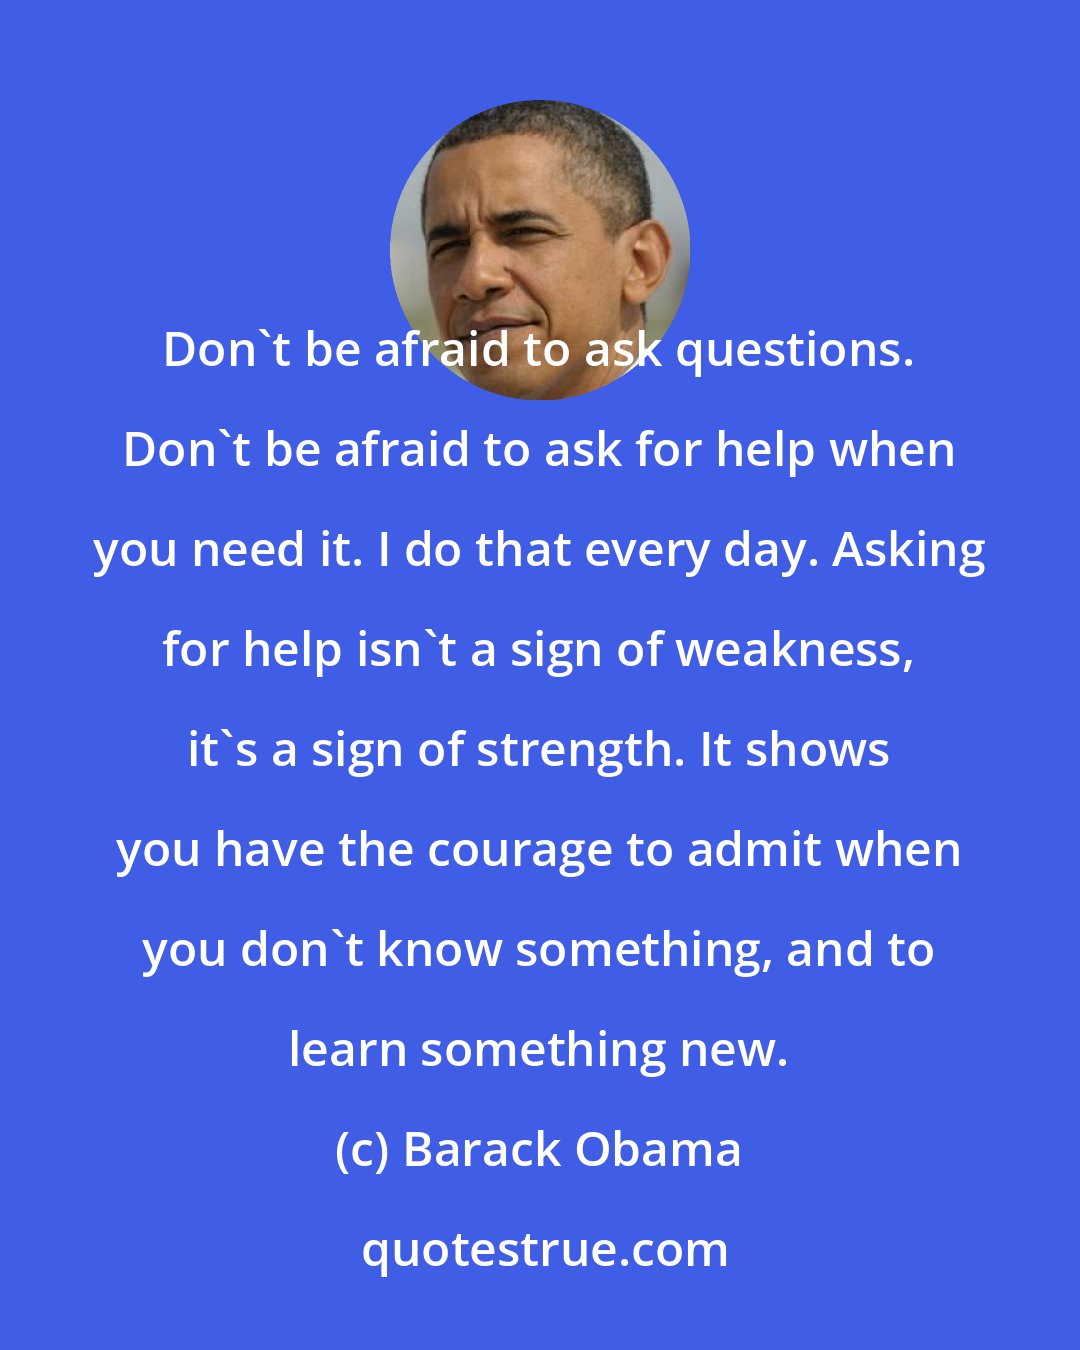 Barack Obama: Don't be afraid to ask questions. Don't be afraid to ask for help when you need it. I do that every day. Asking for help isn't a sign of weakness, it's a sign of strength. It shows you have the courage to admit when you don't know something, and to learn something new.